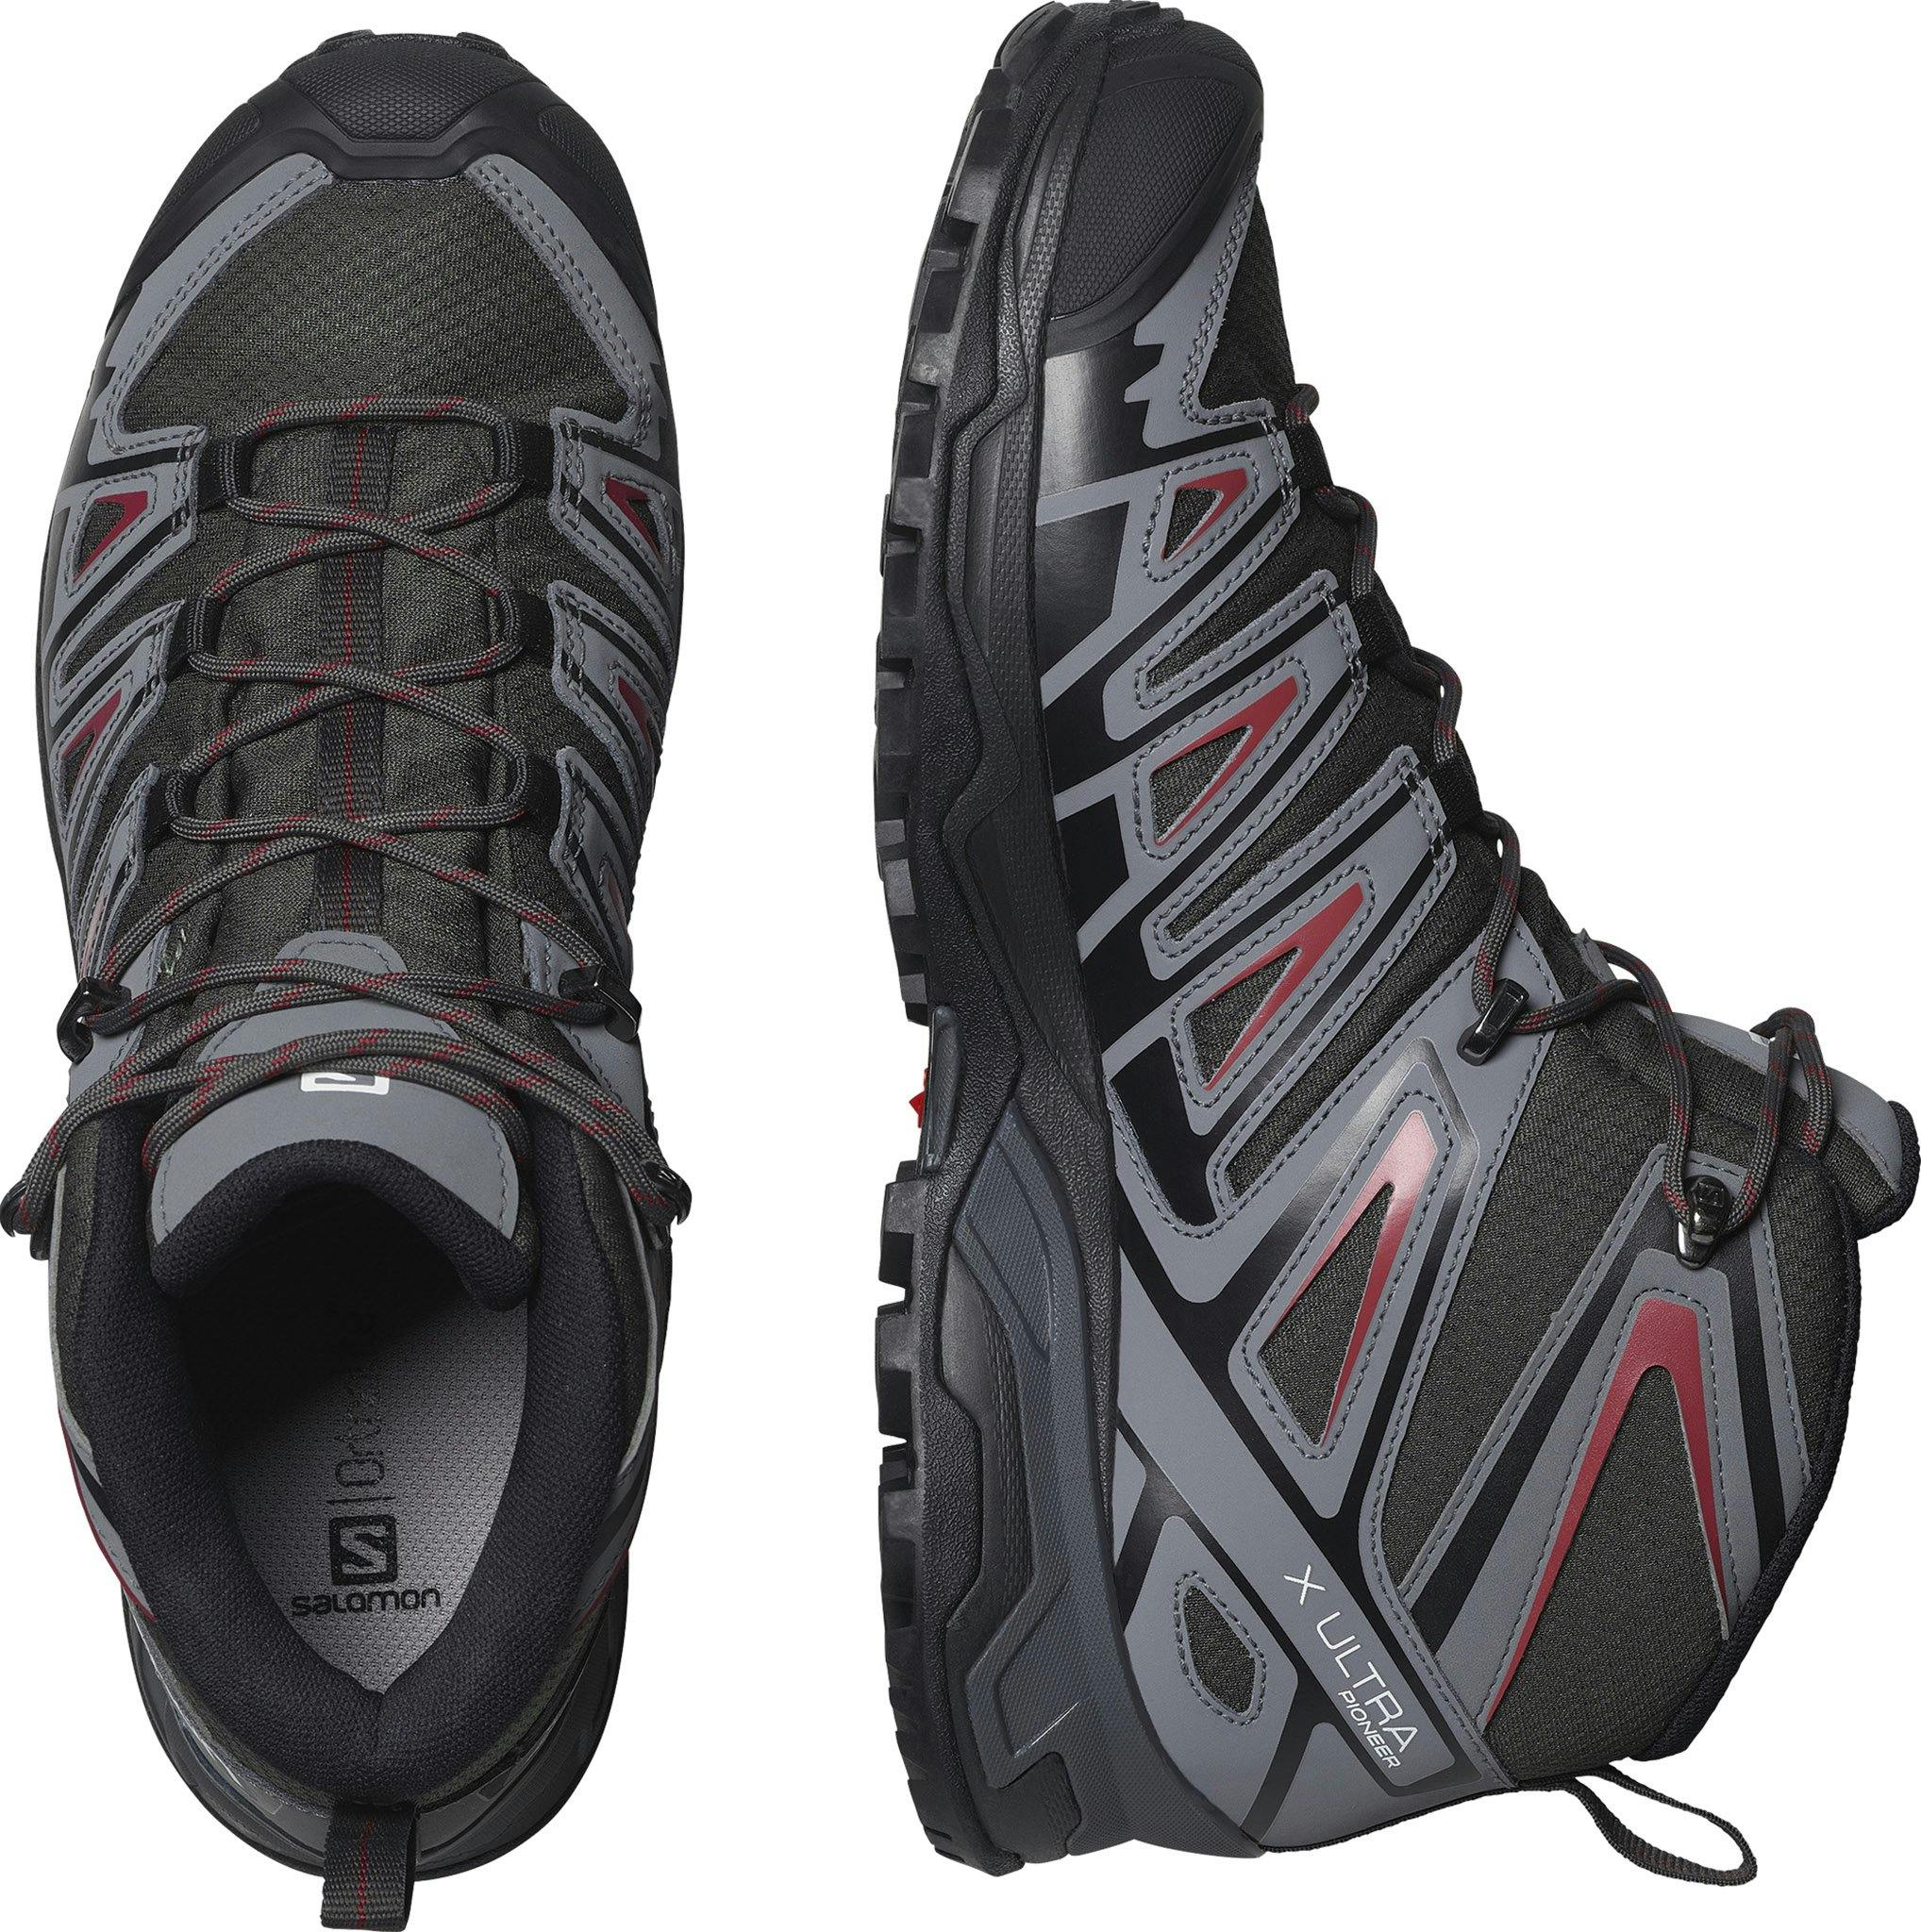 Product gallery image number 9 for product X Ultra Pioneer MID CSWP Hiking Shoes - Men's